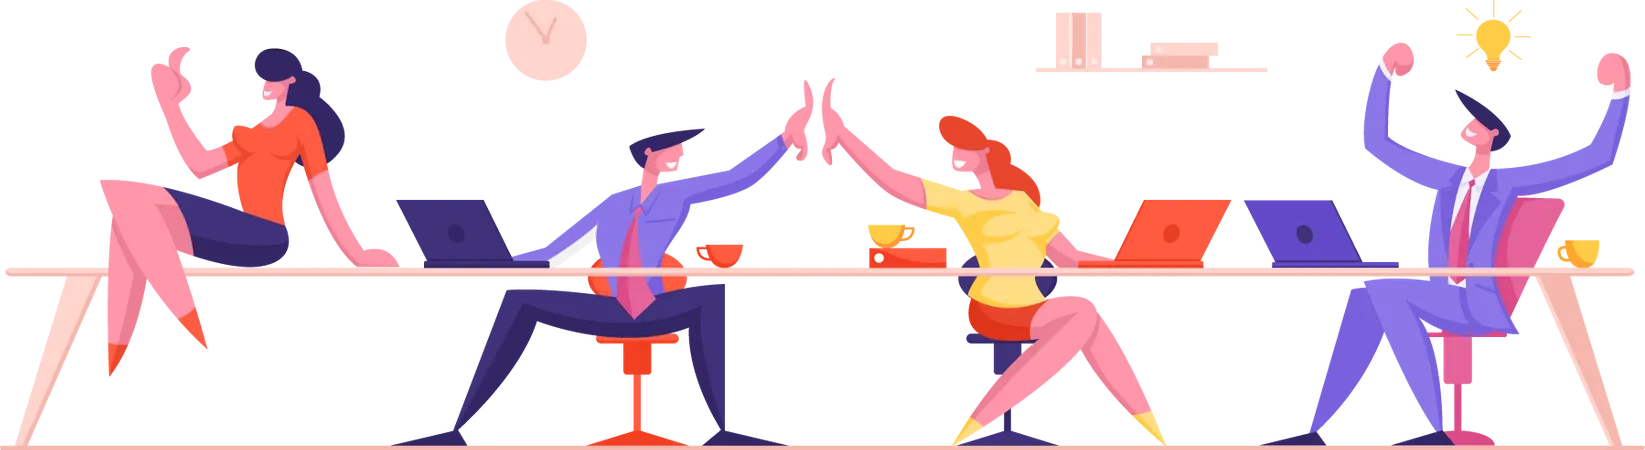 Joyful Business People Rejoice And Giving Highfive After Successful Deal Or Contract Signing Managers Team Businessmen And Businesswomen Characters Teamwork Group Cartoon Flat Vector Illustration Illustration